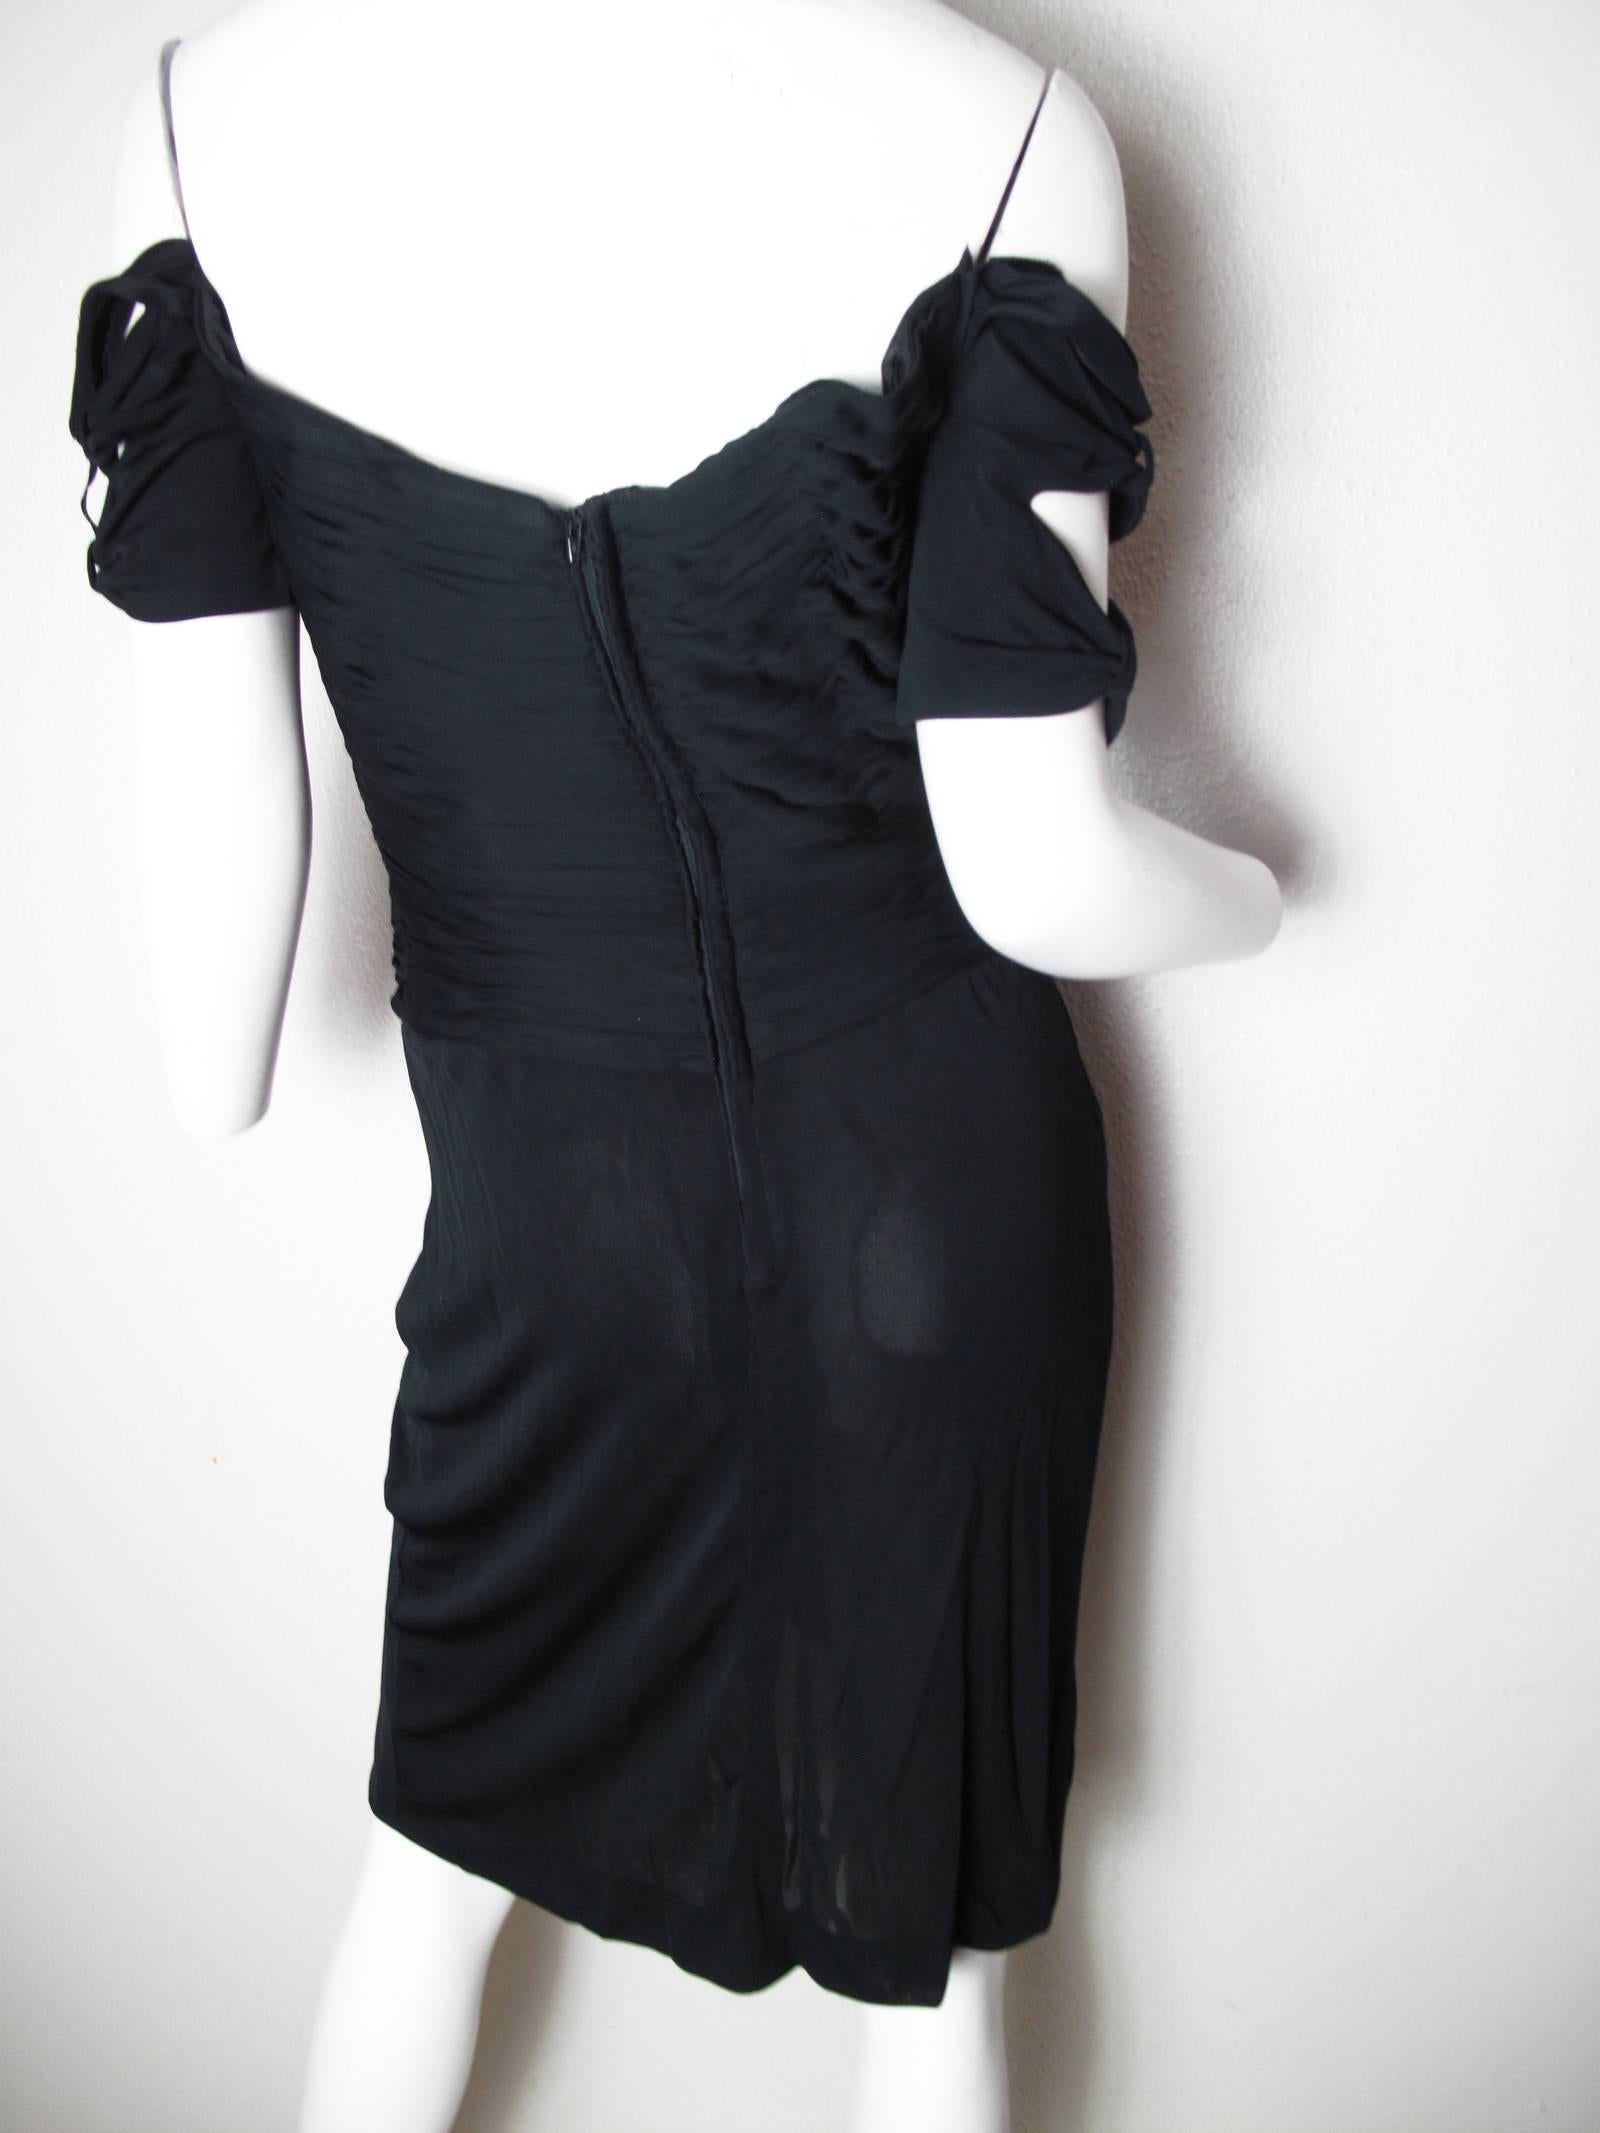 Vicky Tiel black jersey cocktail dress with gathered top and sheer skirt, ties at sleeves. Boning in bodice . 37